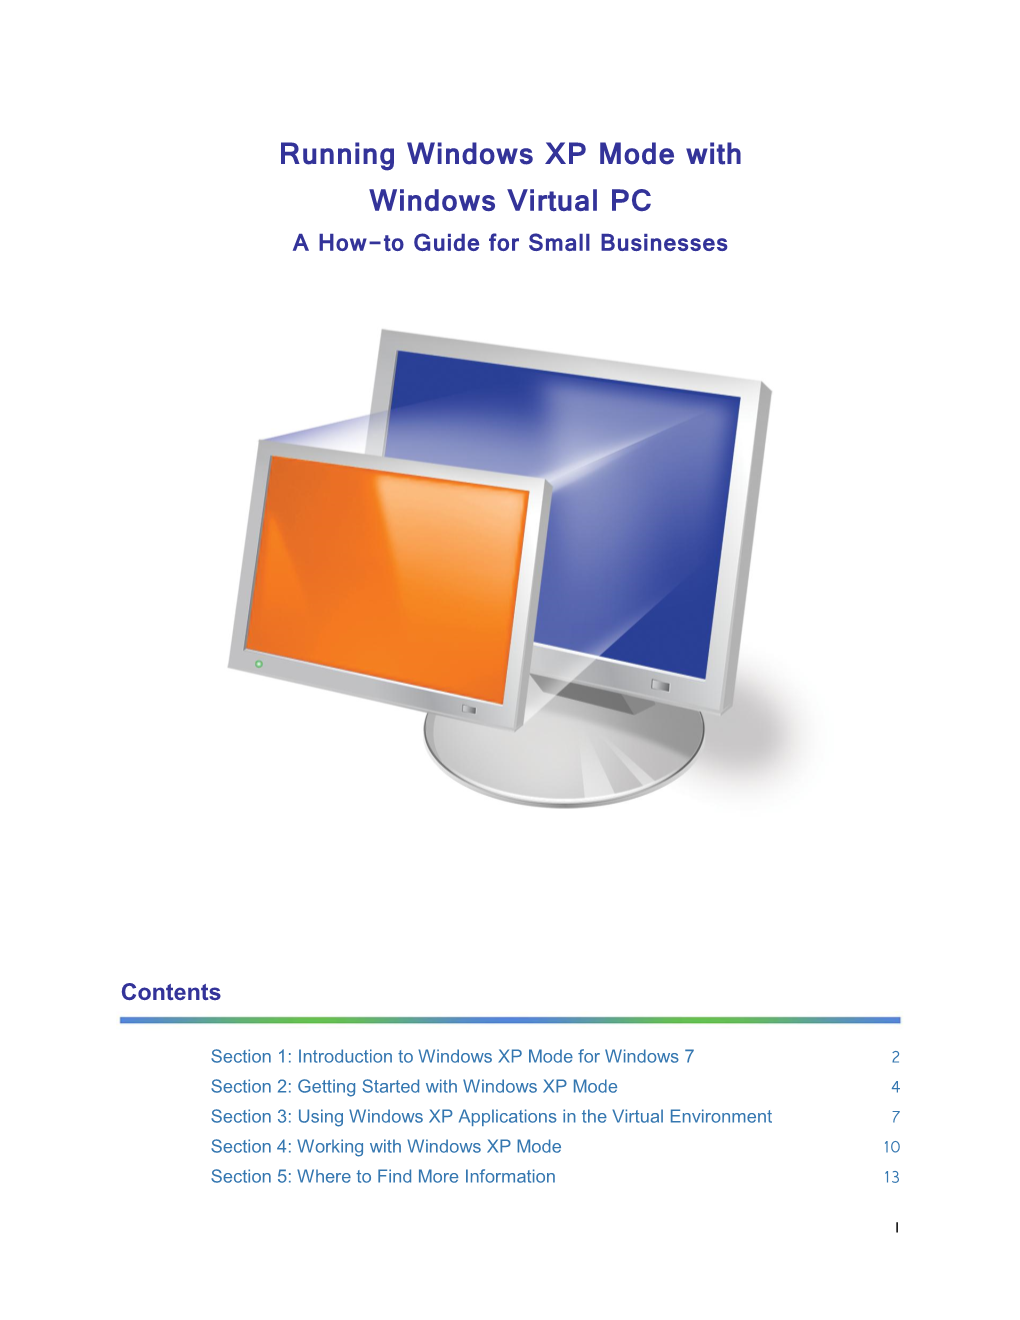 Running Windows XP Mode with Windows Virtual PC a How-To Guide for Small Businesses